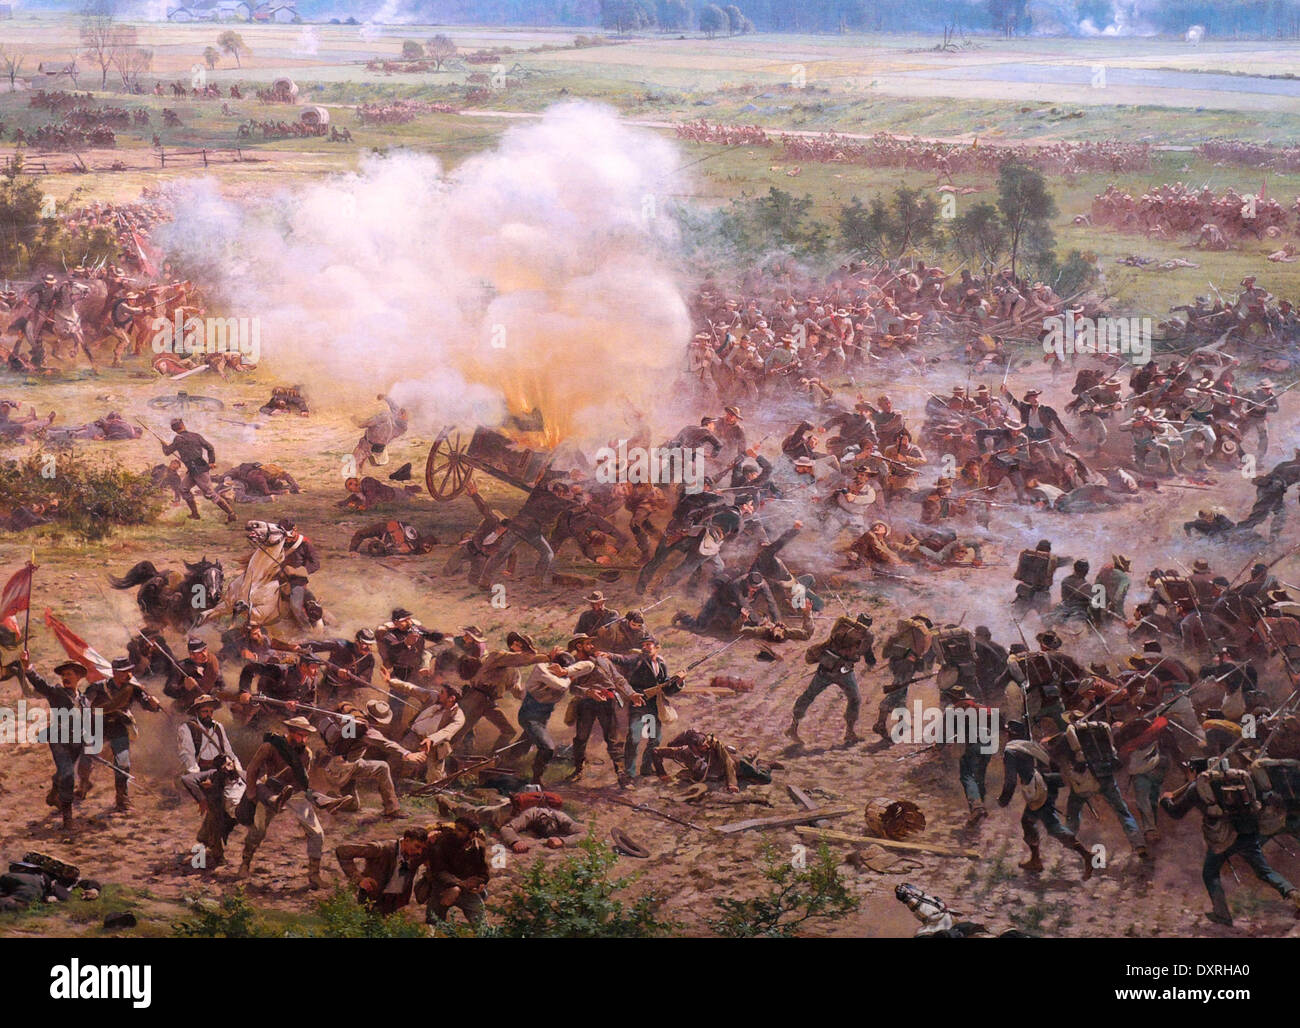 Battle of Gettysburg - USA Civil War - Battle rages as Pickett's charge reaches the union lines Stock Photo